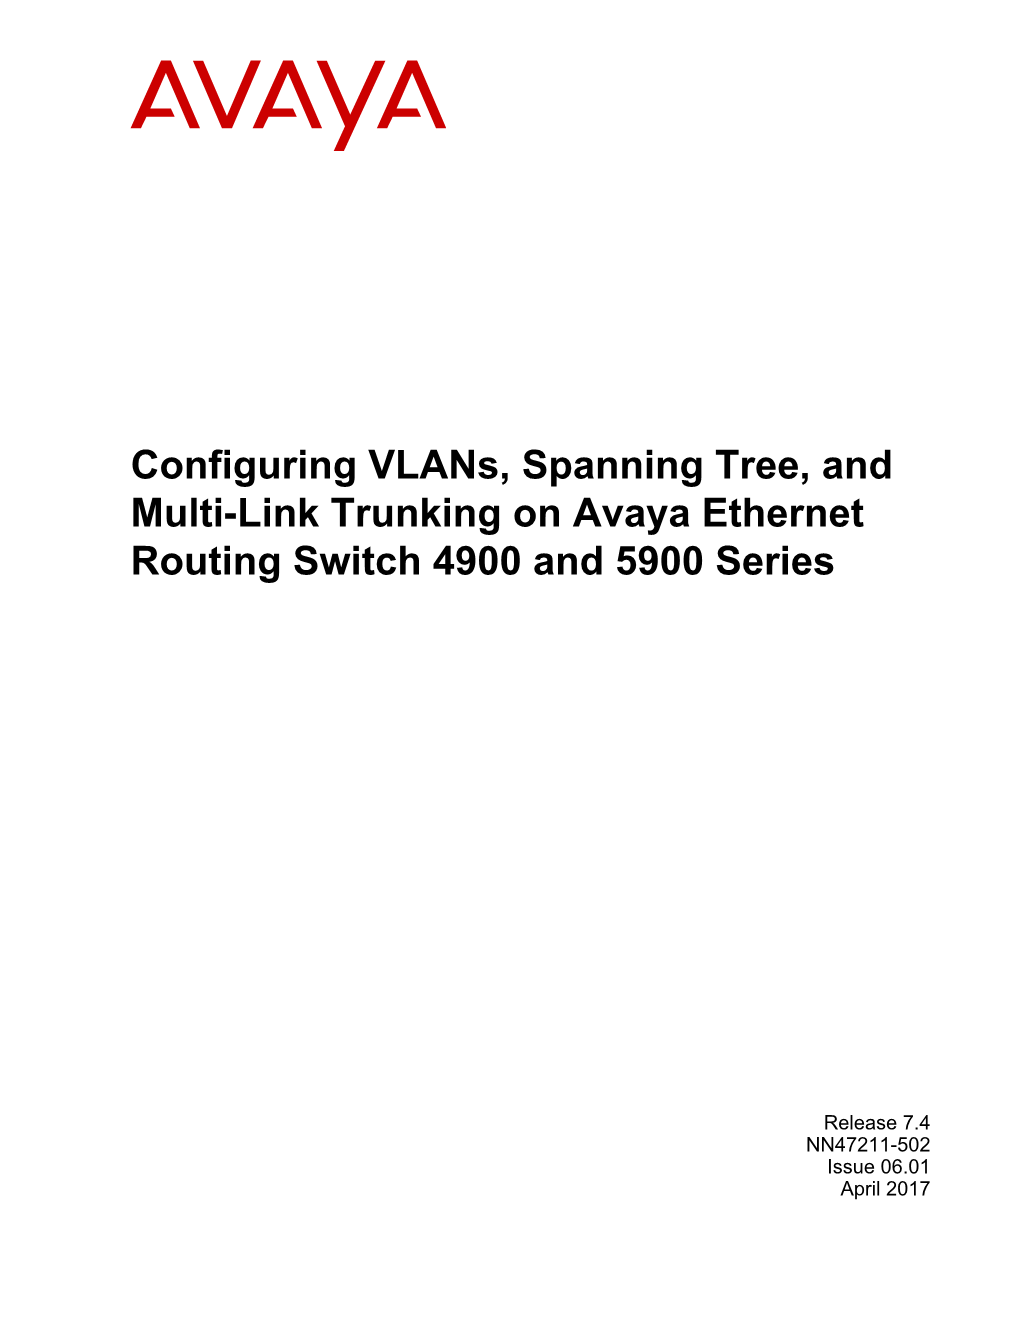 Configuring Vlans, Spanning Tree, and Multi-Link Trunking on Avaya Ethernet Routing Switch 4900 and 5900 Series